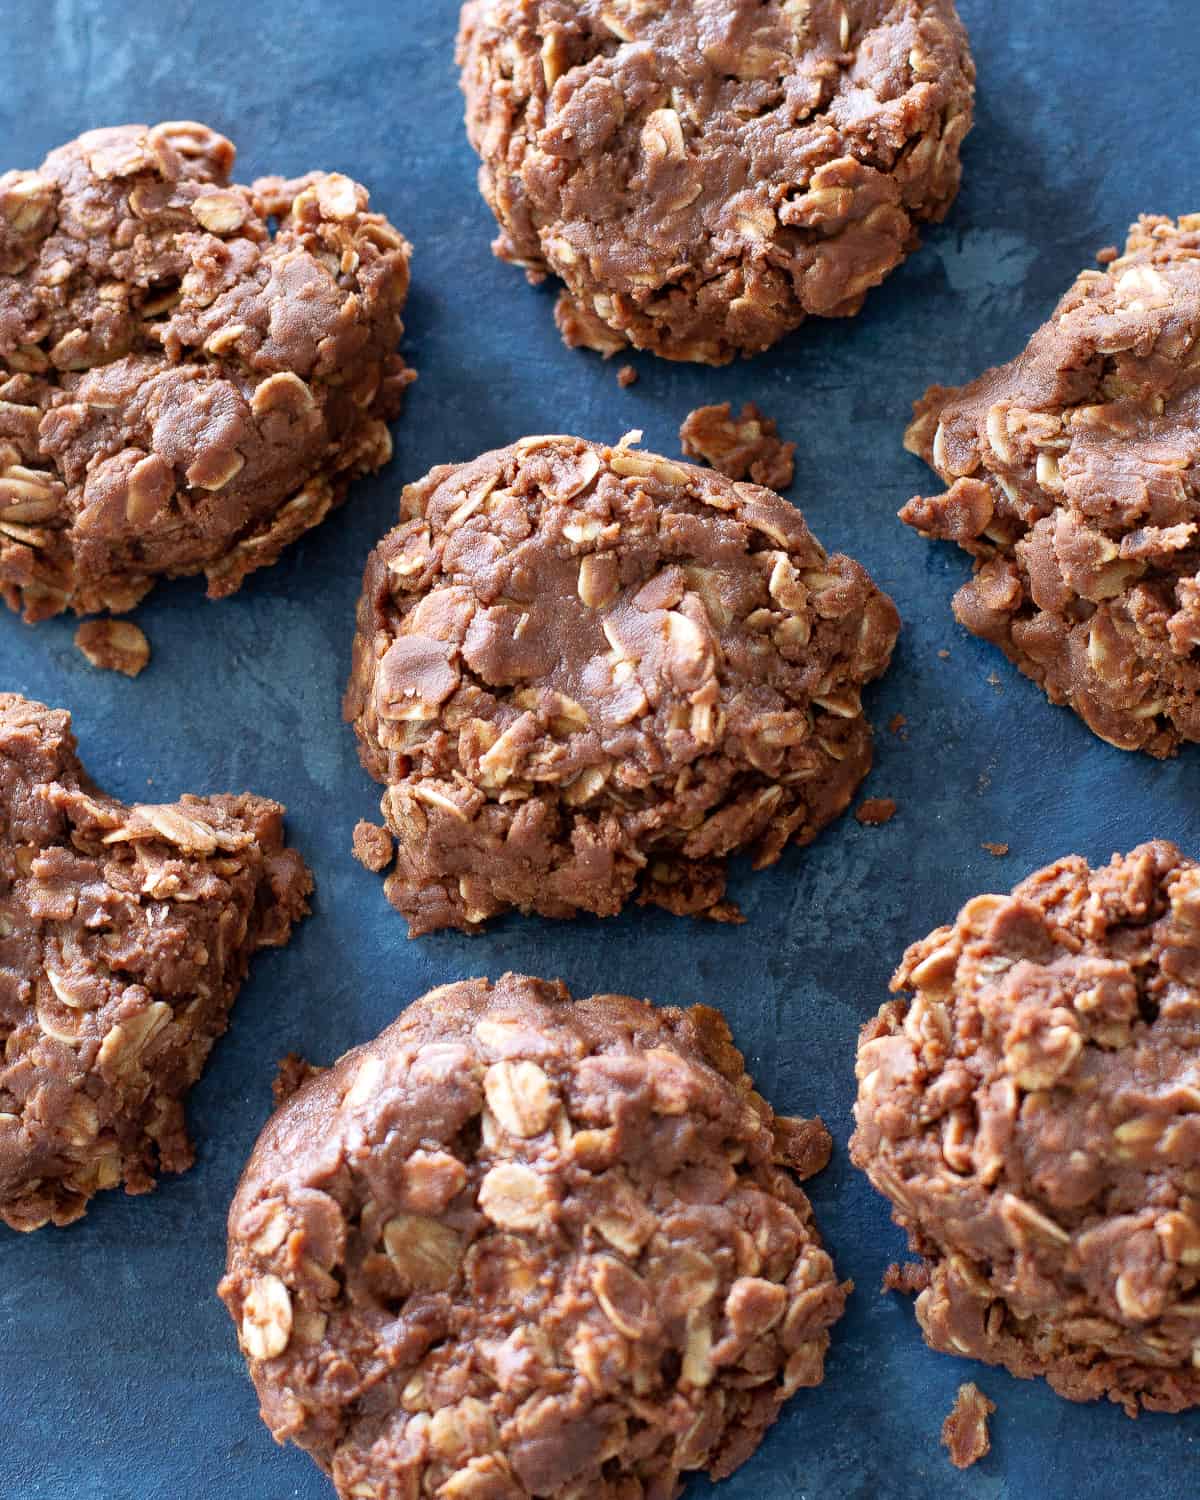 Chocolate Peanut Butter No Bake Cookies - A Crowd Favorite